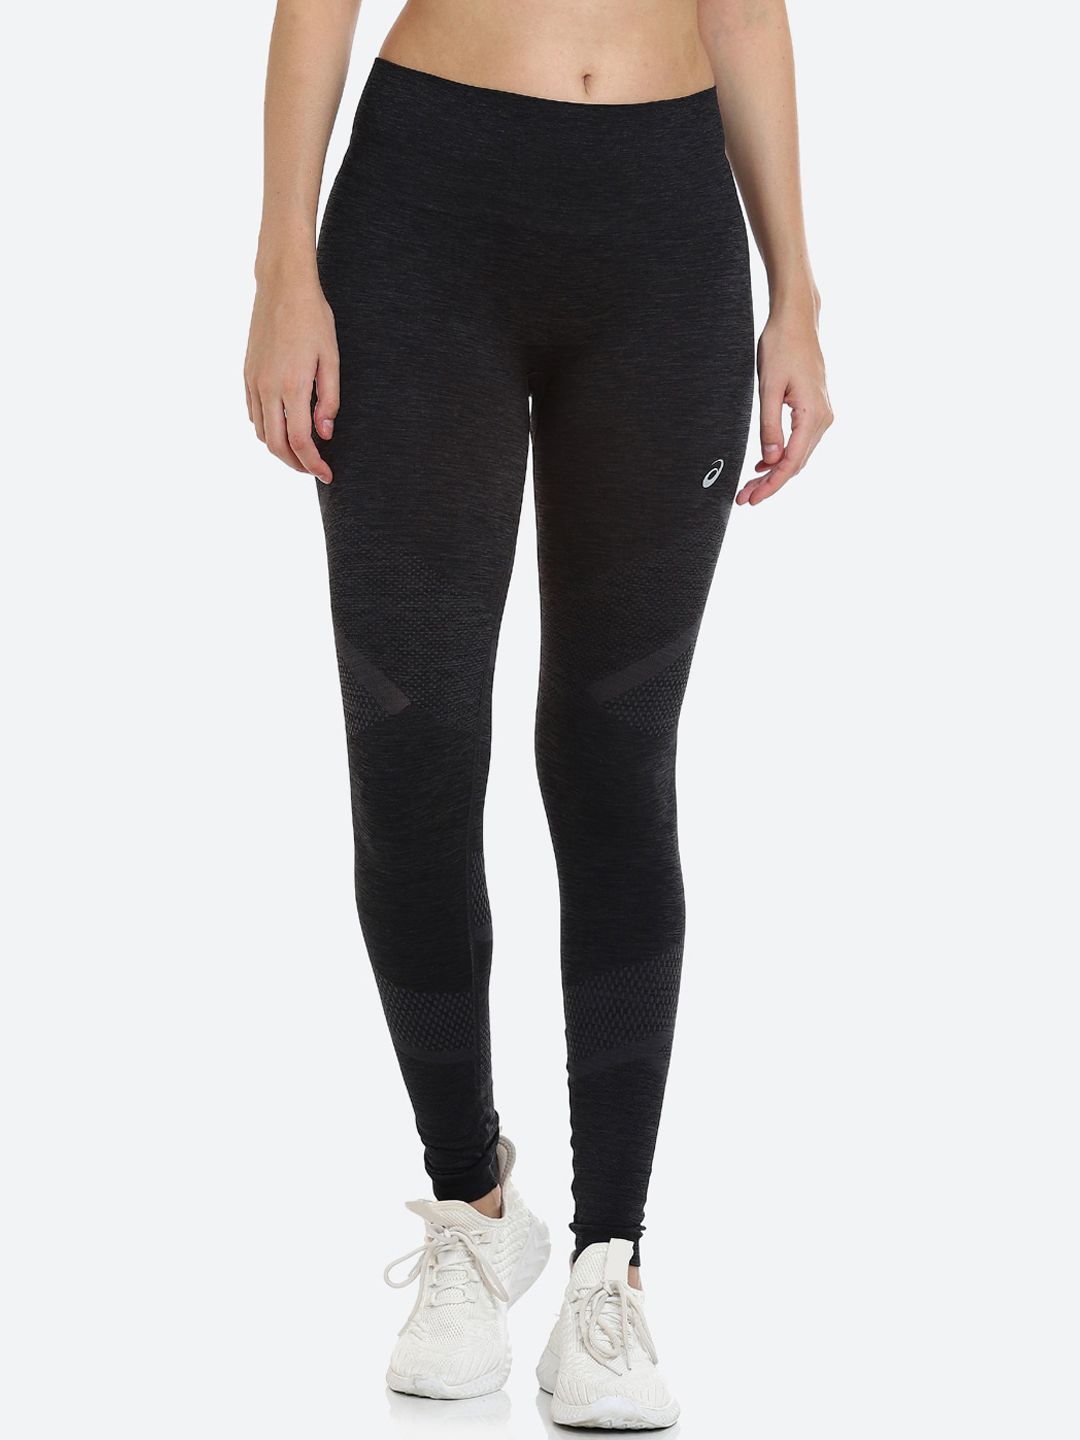 ASICS Women Black Solid Seamless Tights Price in India